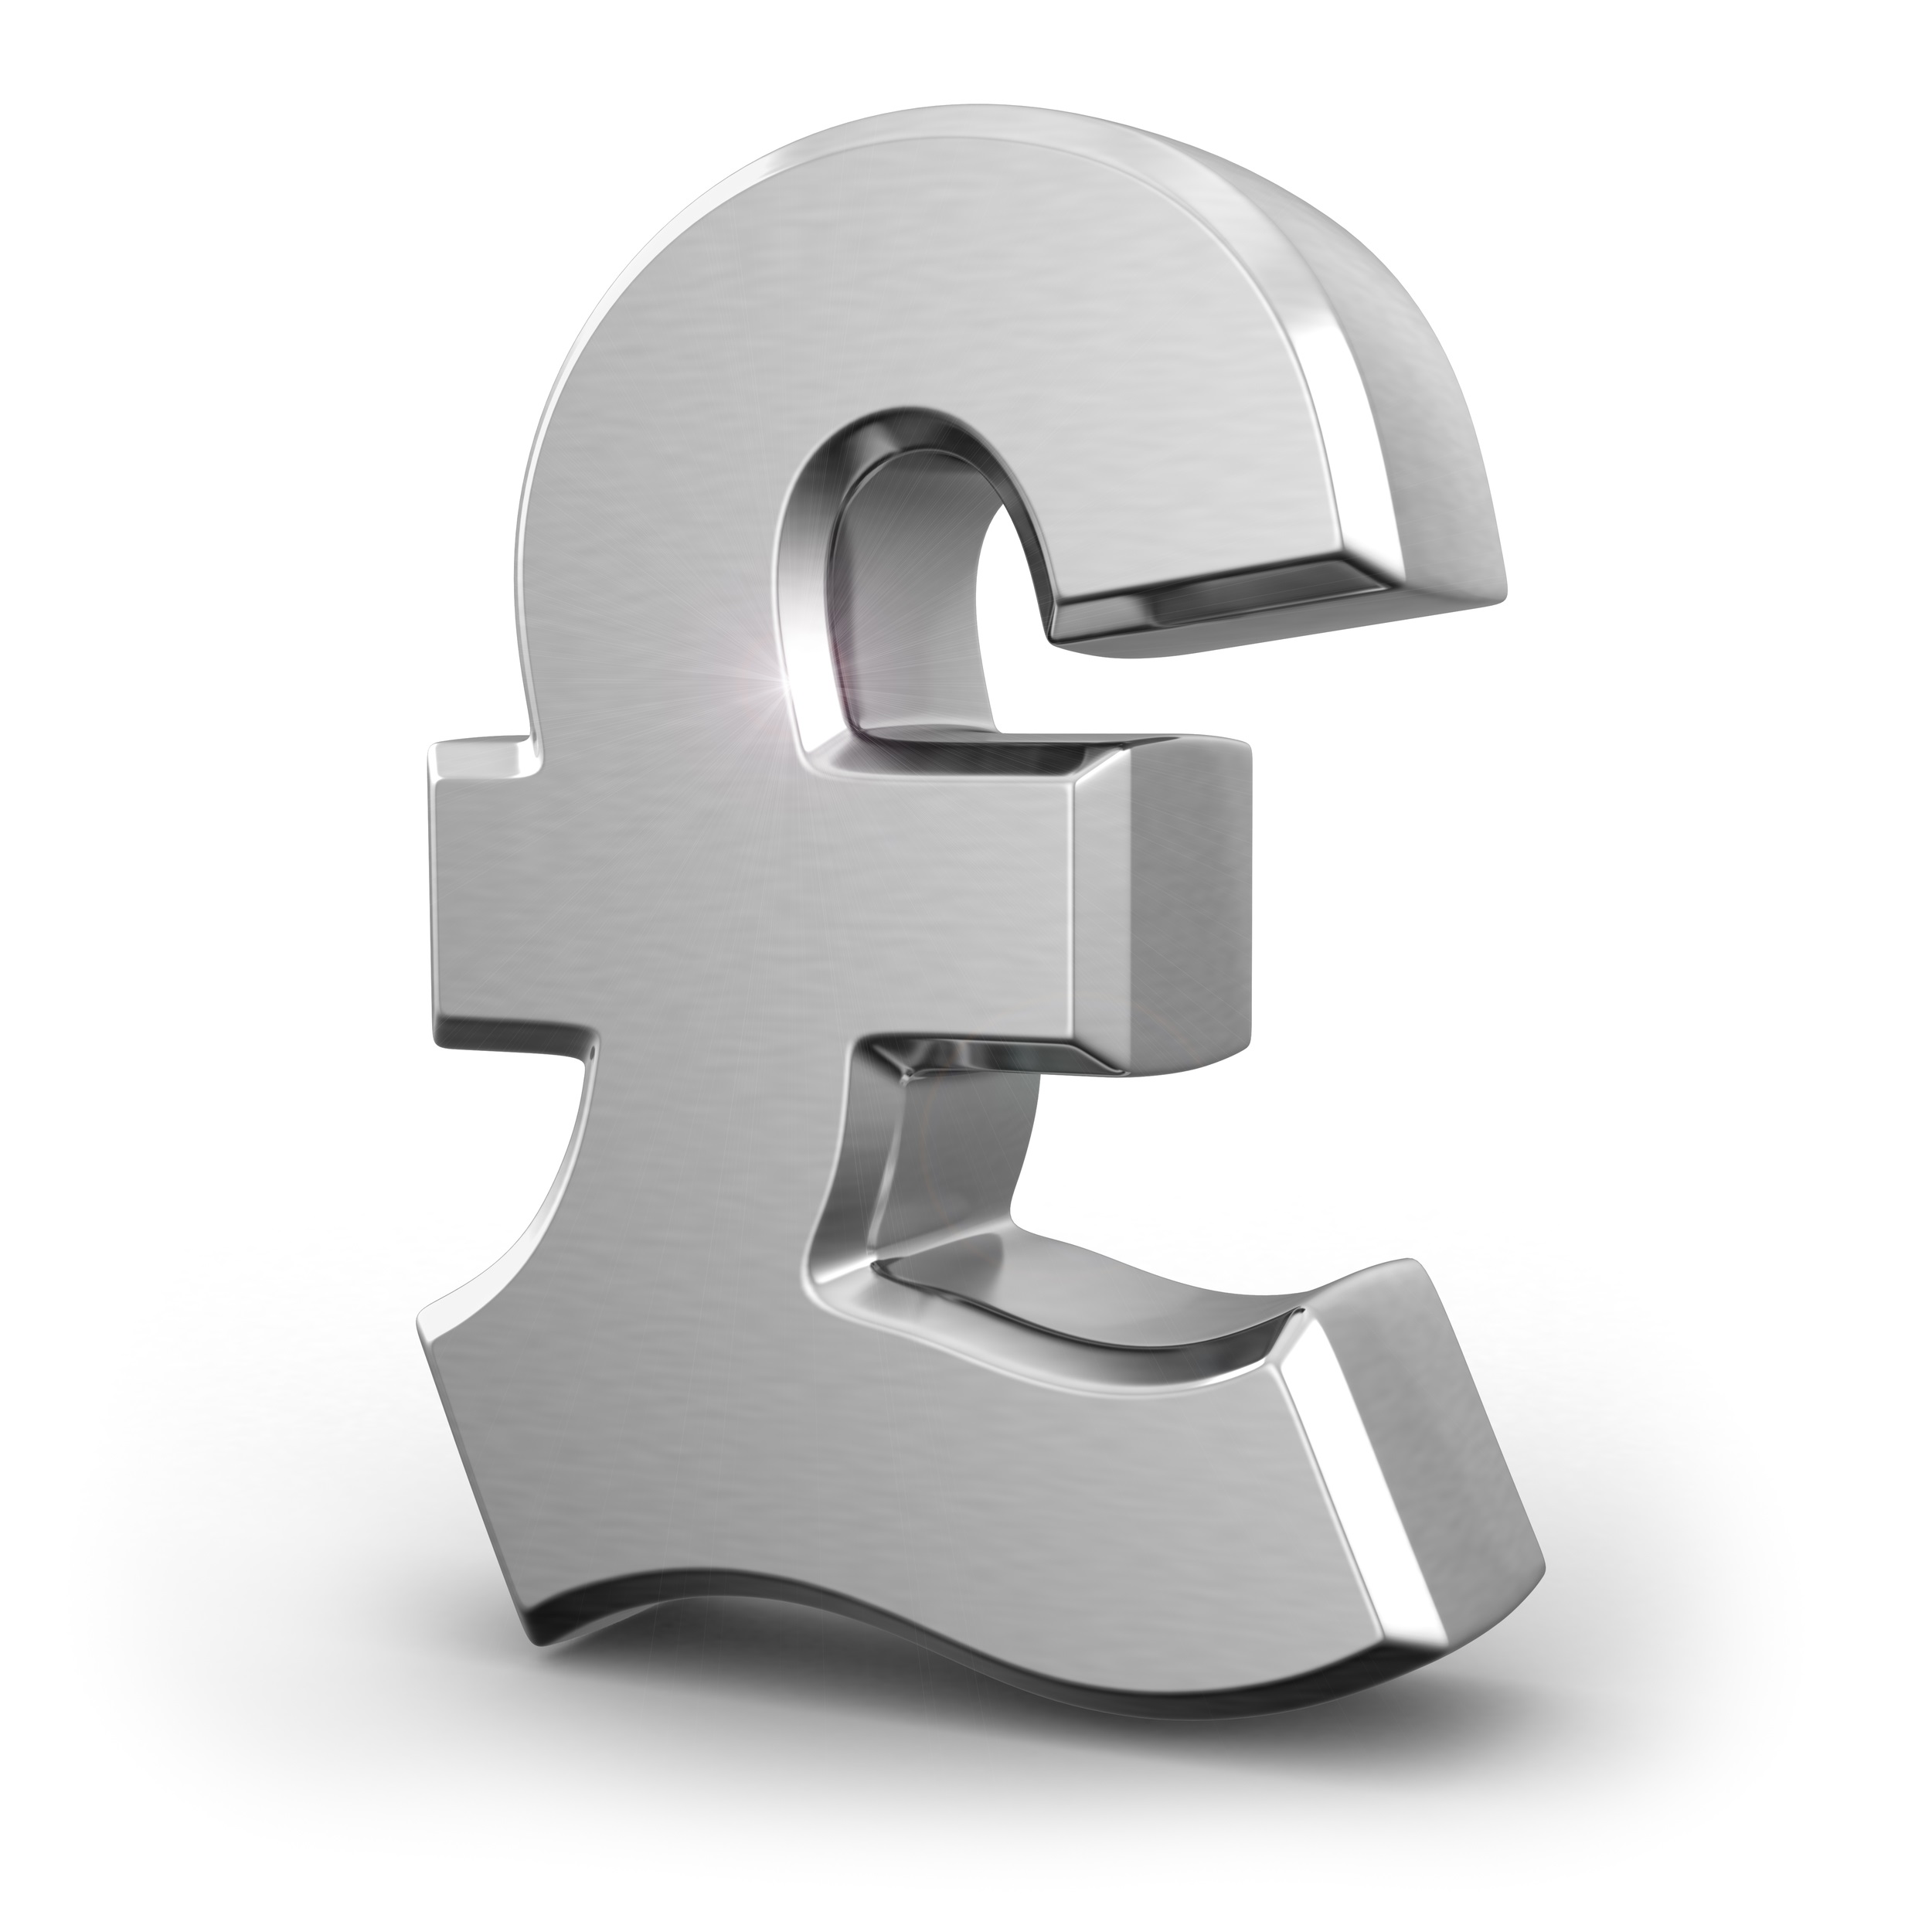 Silver pound currency sign on white isolated background. 3d